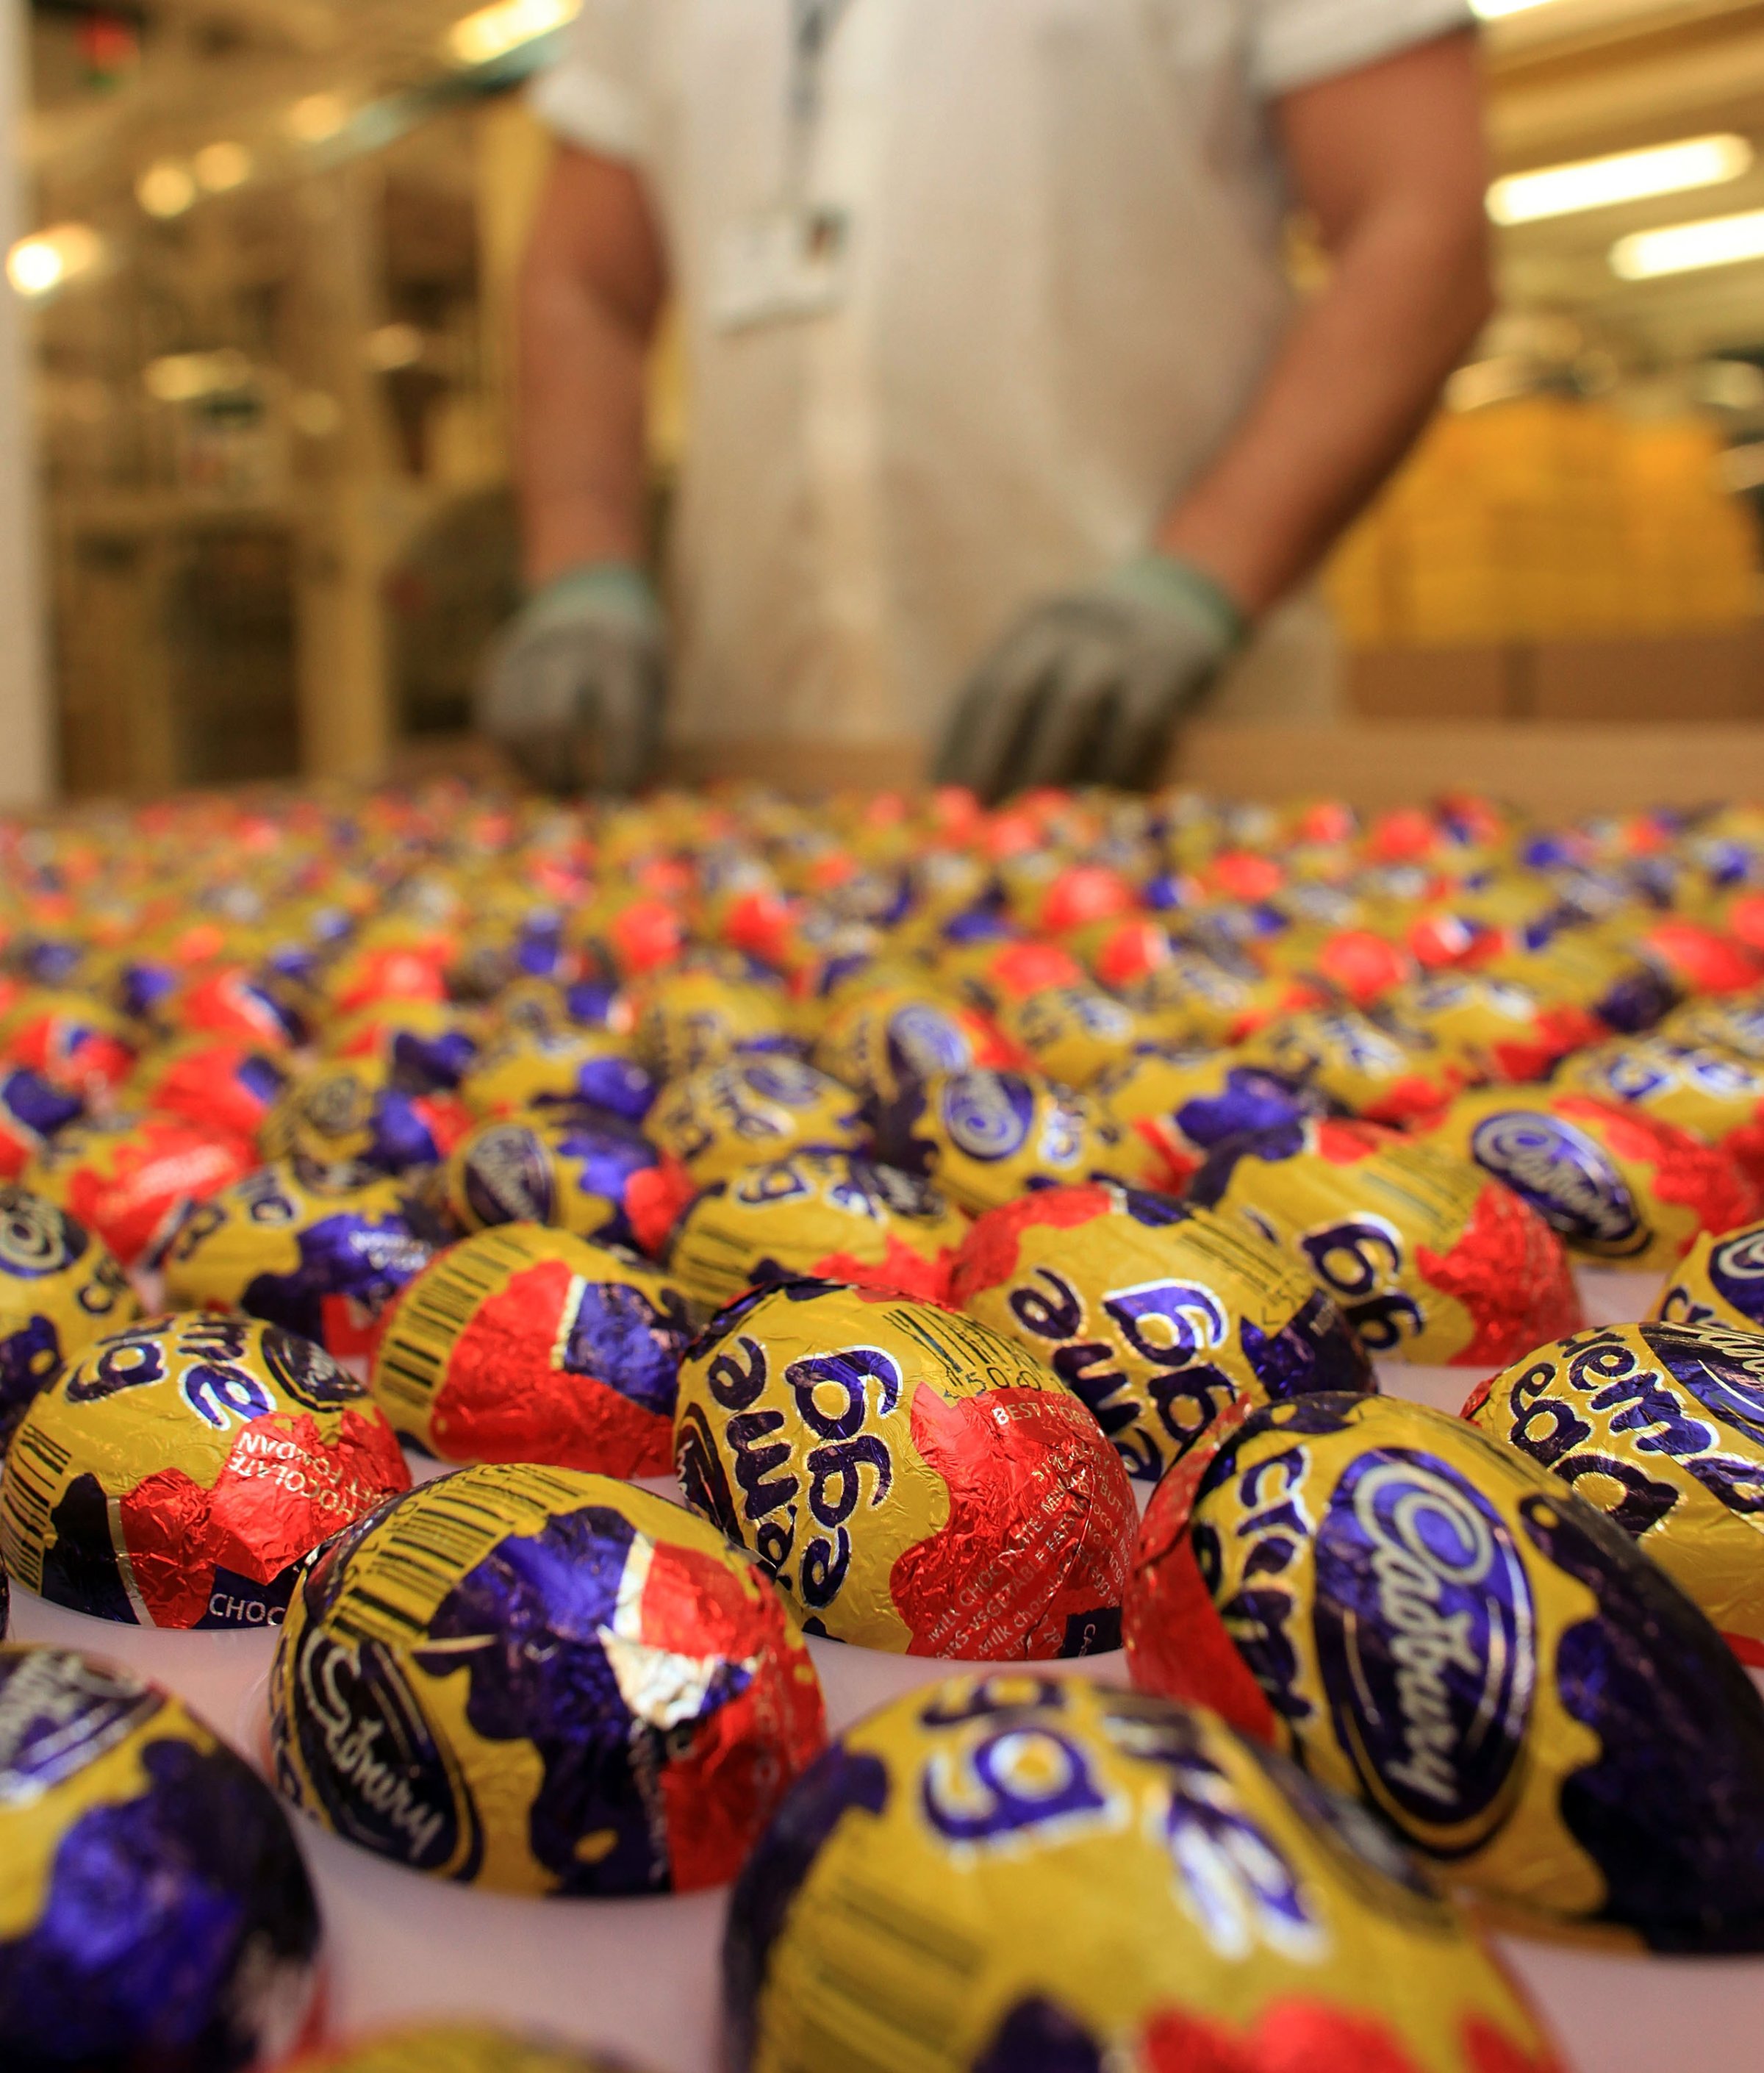 Chocolate Production Continues At Cadbury During Hostile Takeover Bids